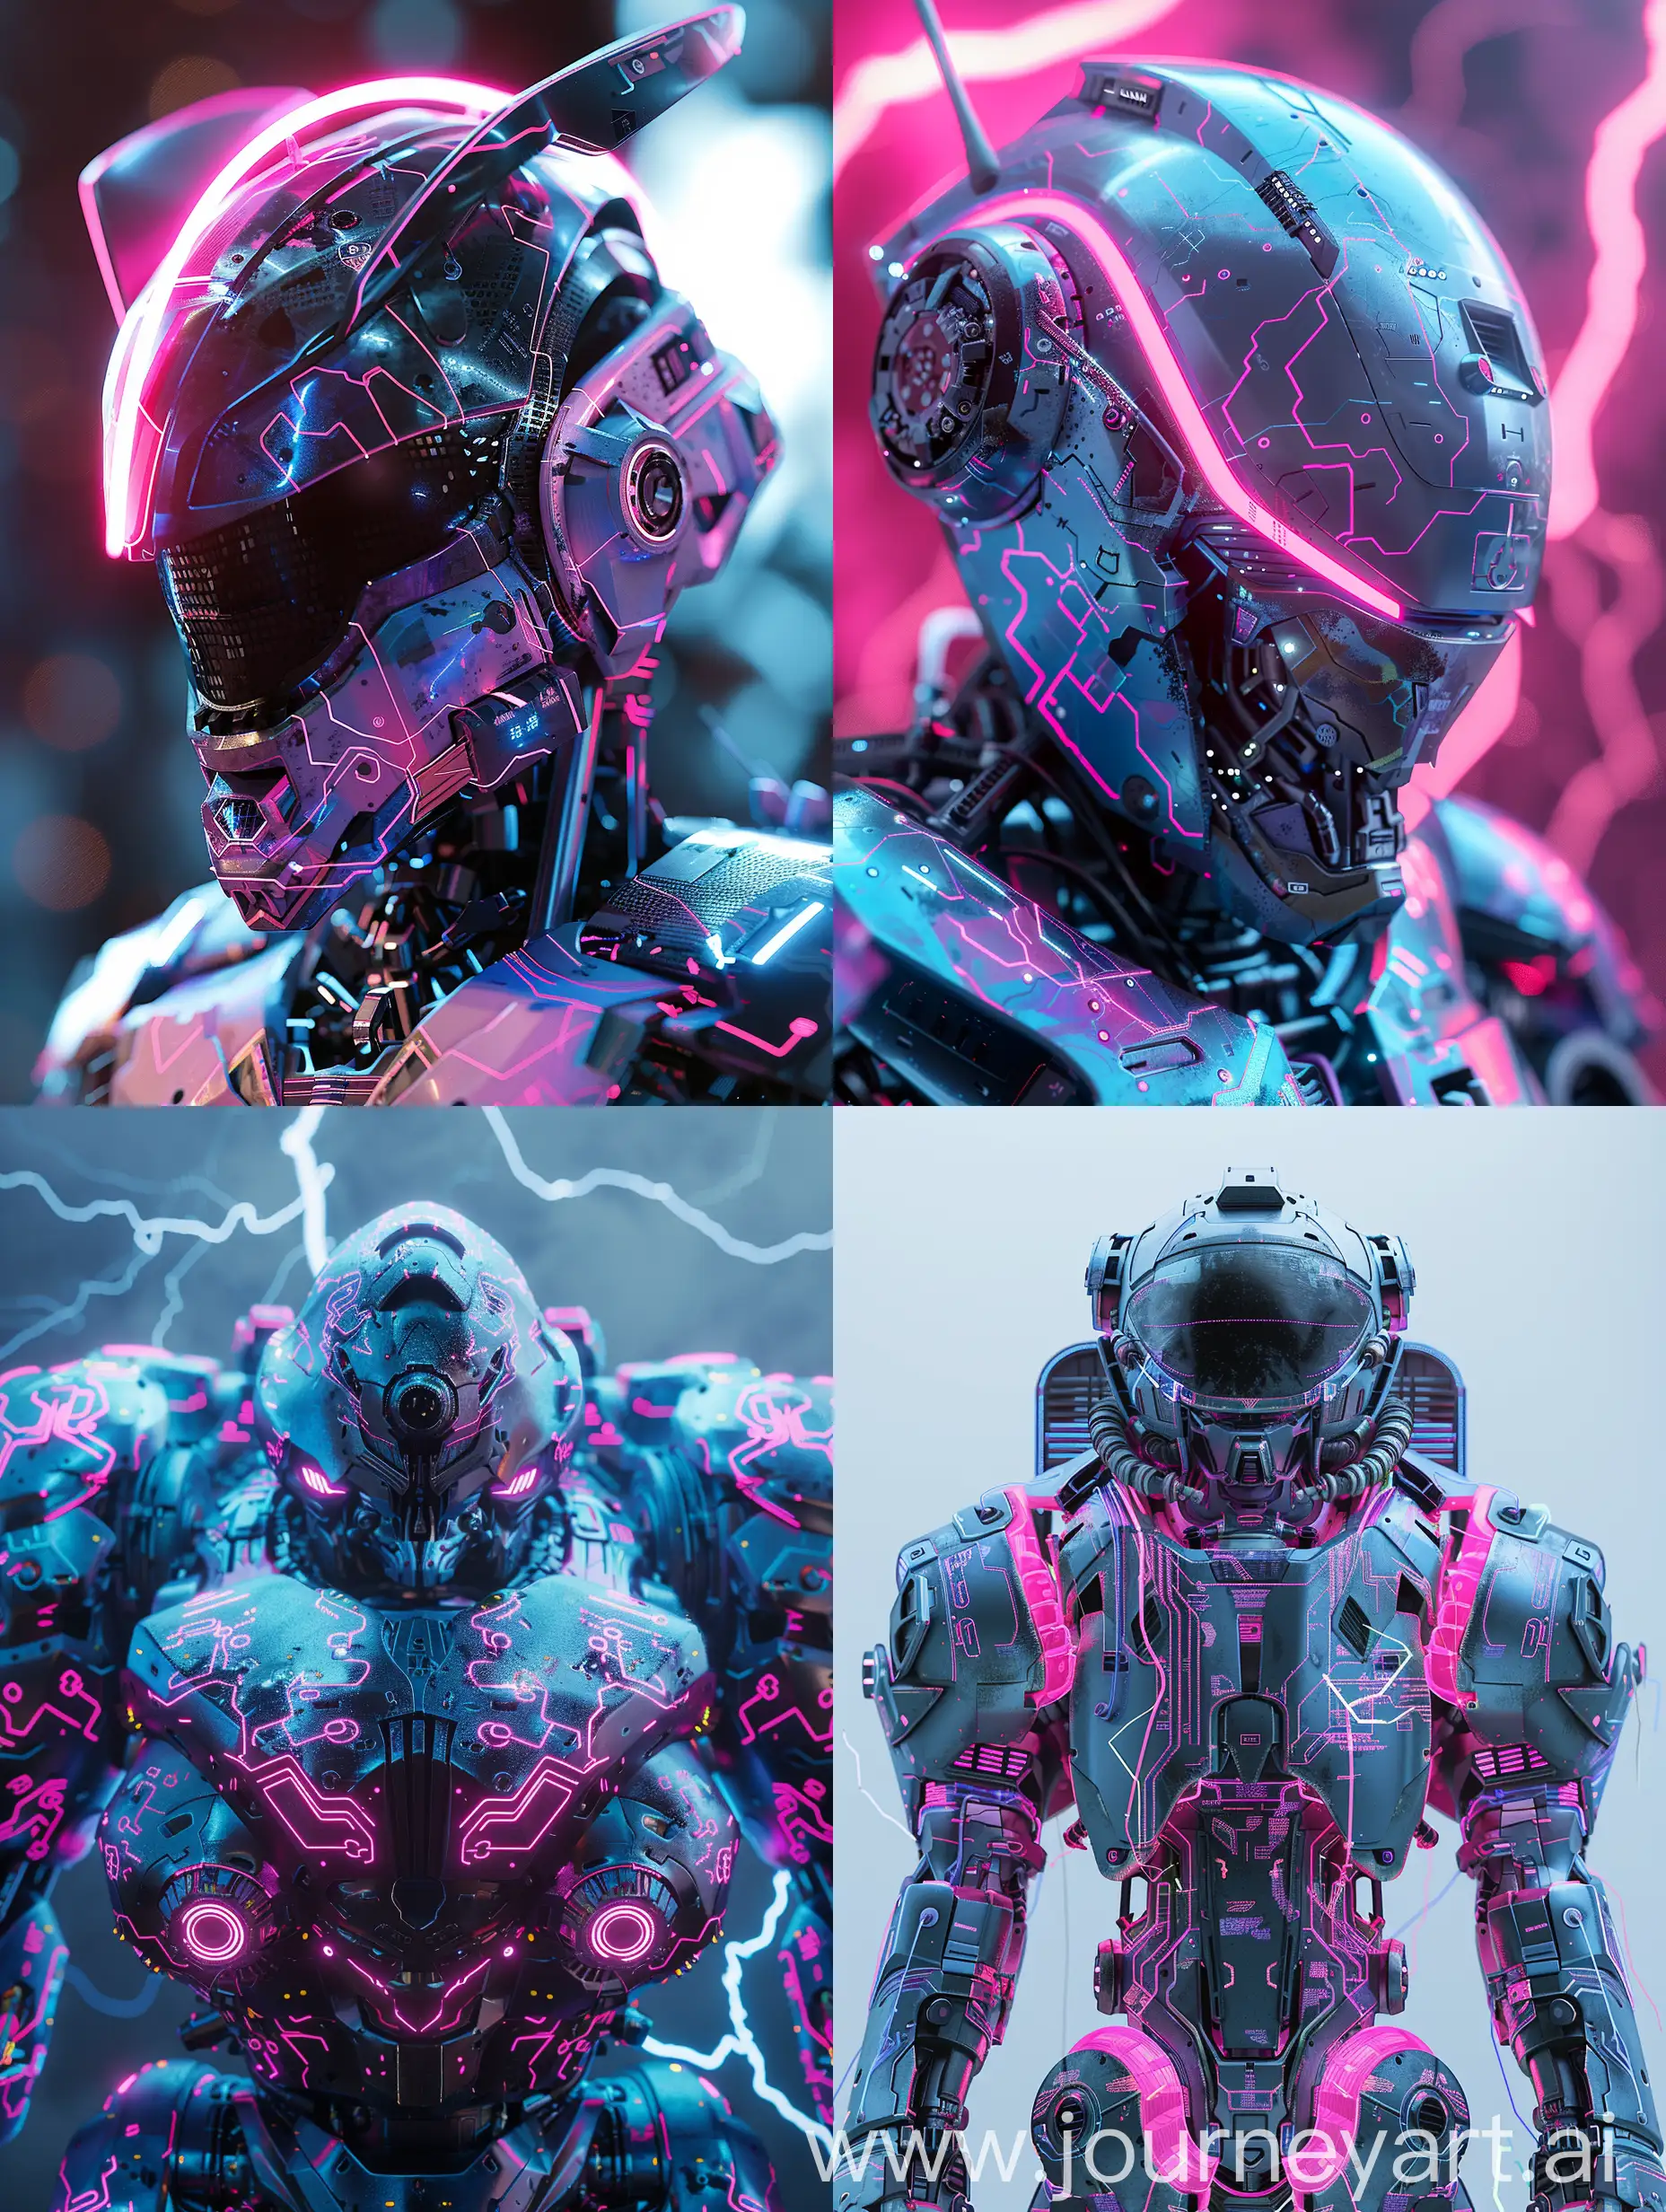 gundam wing style, pacific rim style Jaeger, with subtle pink and blue gradients, intricate neon circuit pattern, lightning arc plasma, Jaeger with wide aggressive armored helmet, exoskeleton, mechanical exoskeleton, exoskeleton armor mecha suit, decepticon armor plating, dark metal decepticon, futuristic, ultra detailed, ultra realistic, cinematic atmosphere, unreal engine, octane render.